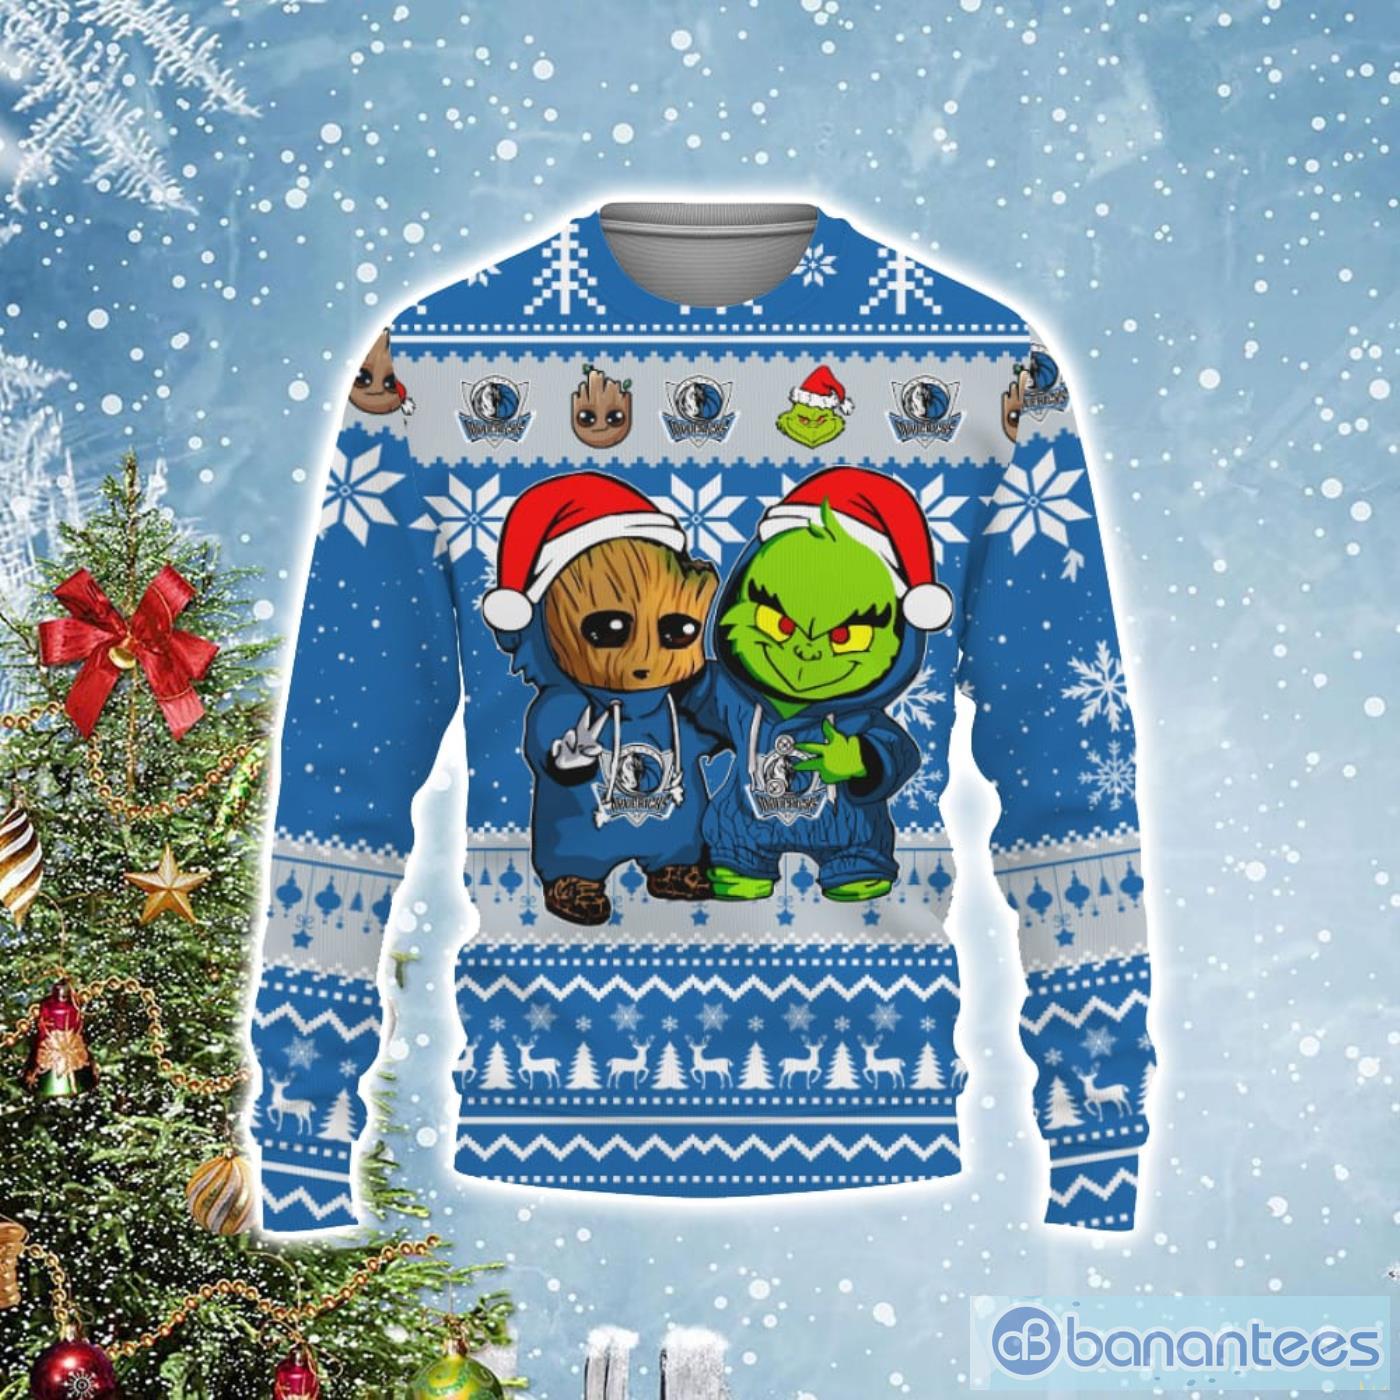 Dallas Mavericks Baby Groot And Grinch Best Friends Football Ugly Christmas Sweater Product Photo 1